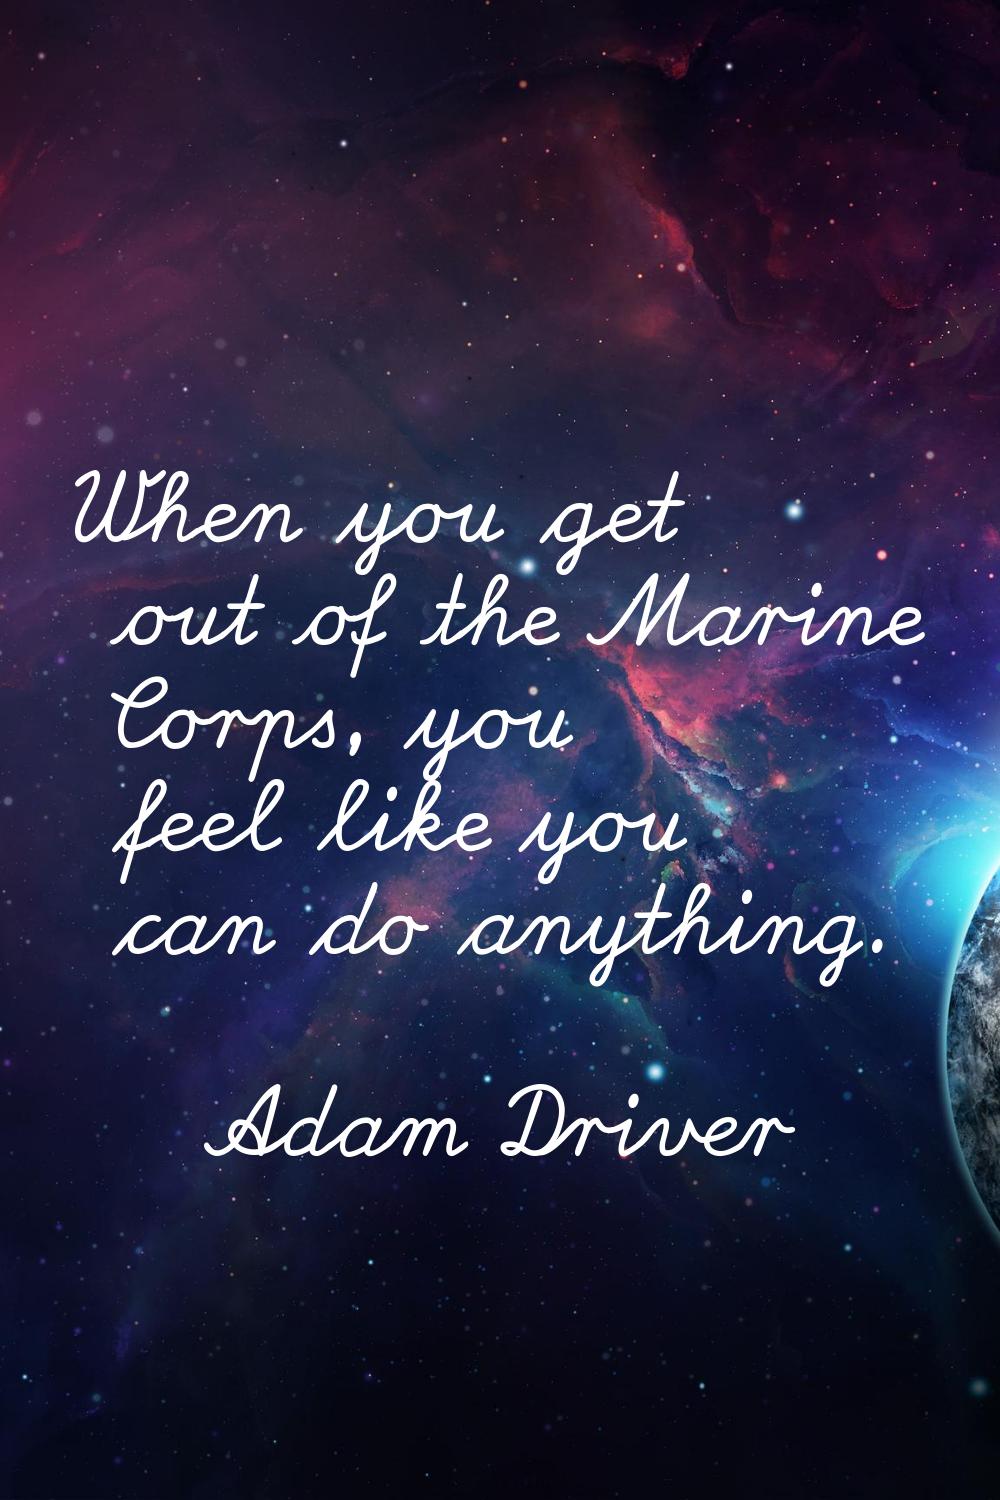 When you get out of the Marine Corps, you feel like you can do anything.